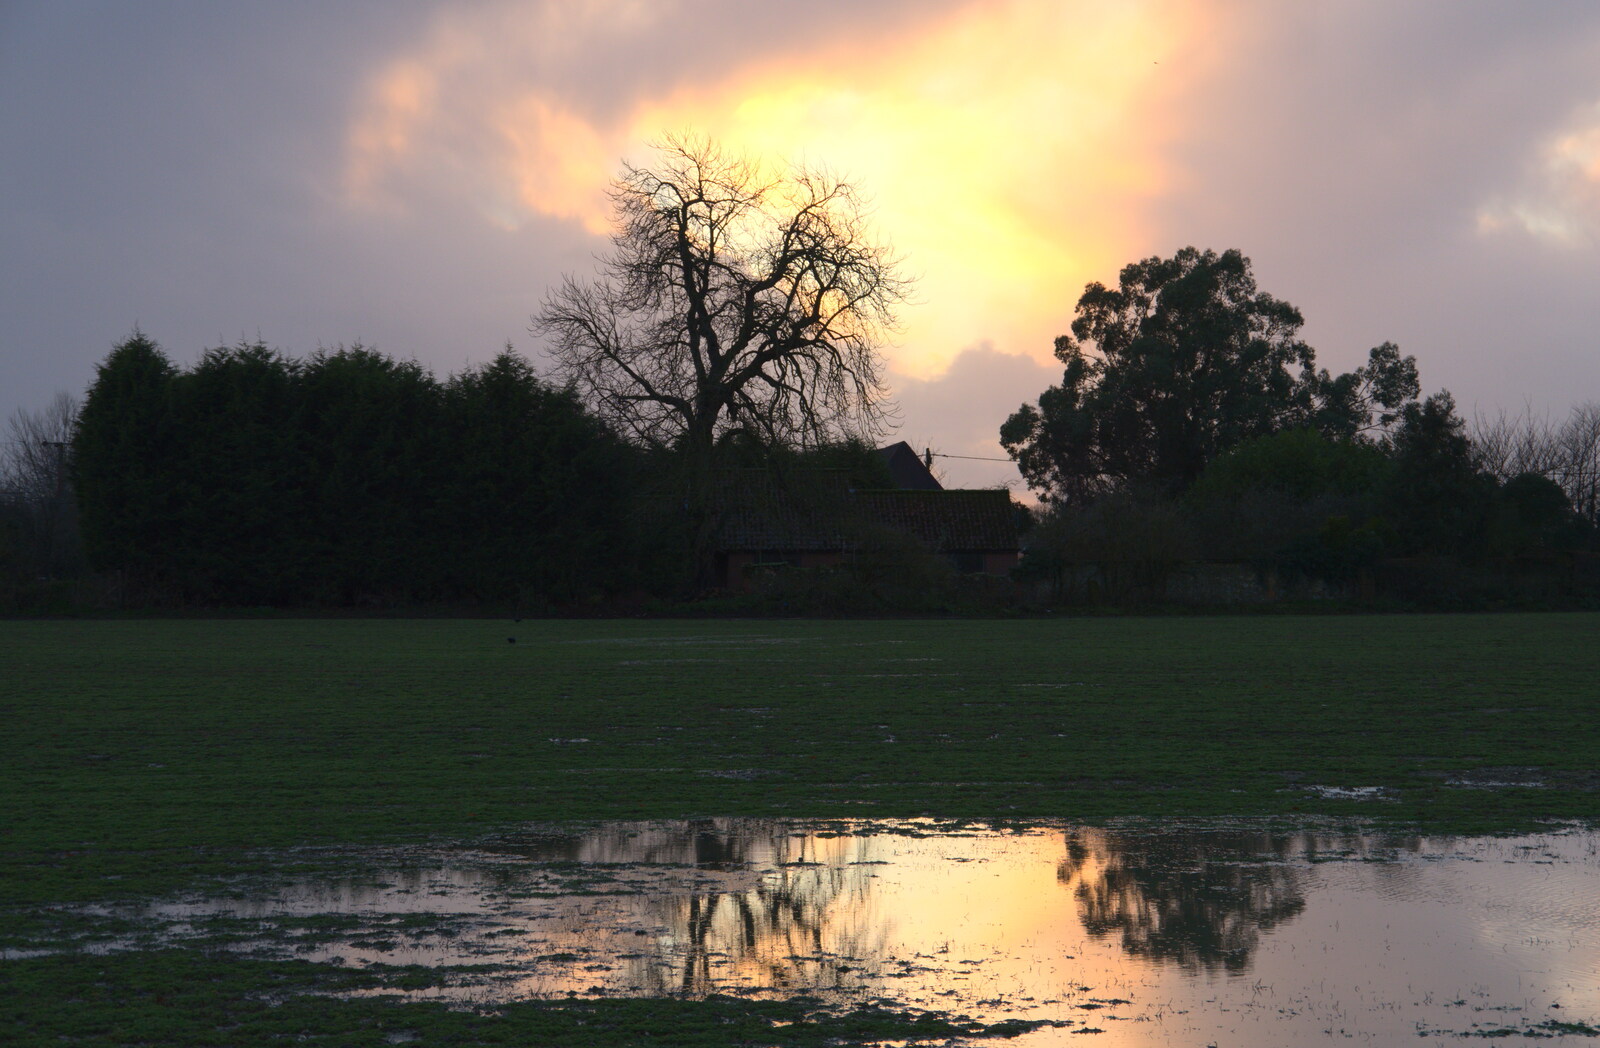 Angry sunset over the sodden side field from The Christmas Eve Floods, Diss, Norfolk - 24th December 2020